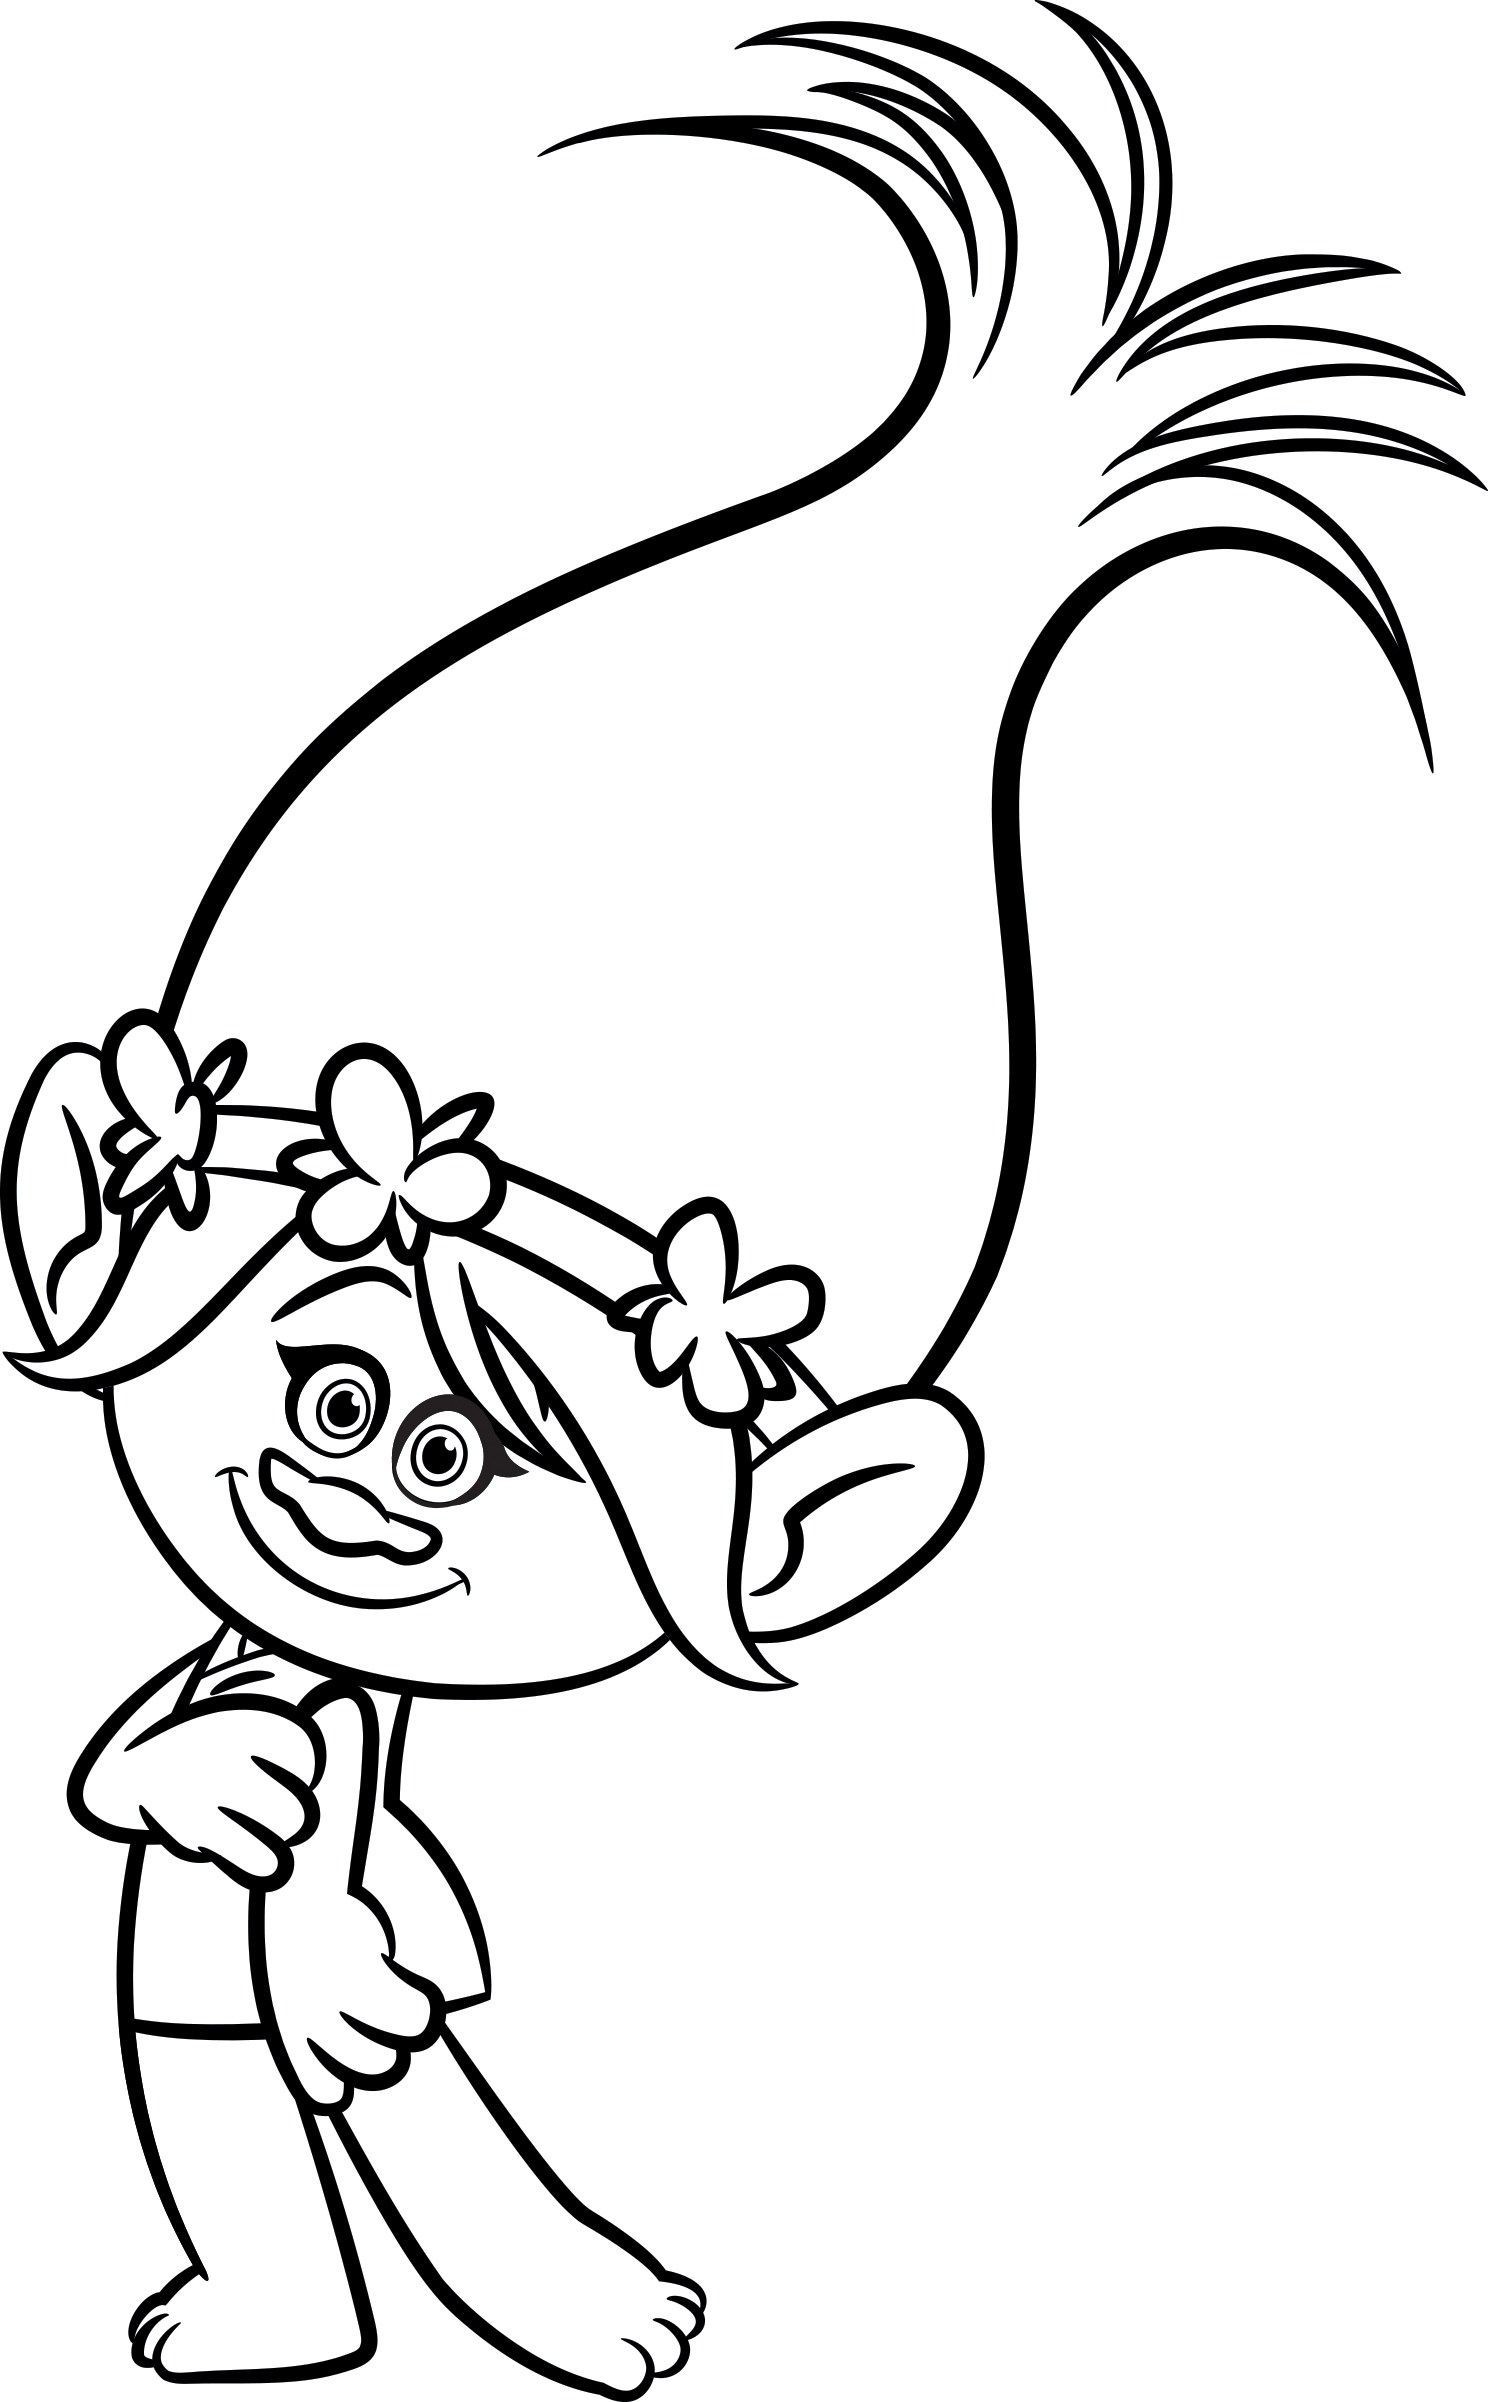 Trolls Black and White Coloring Pages